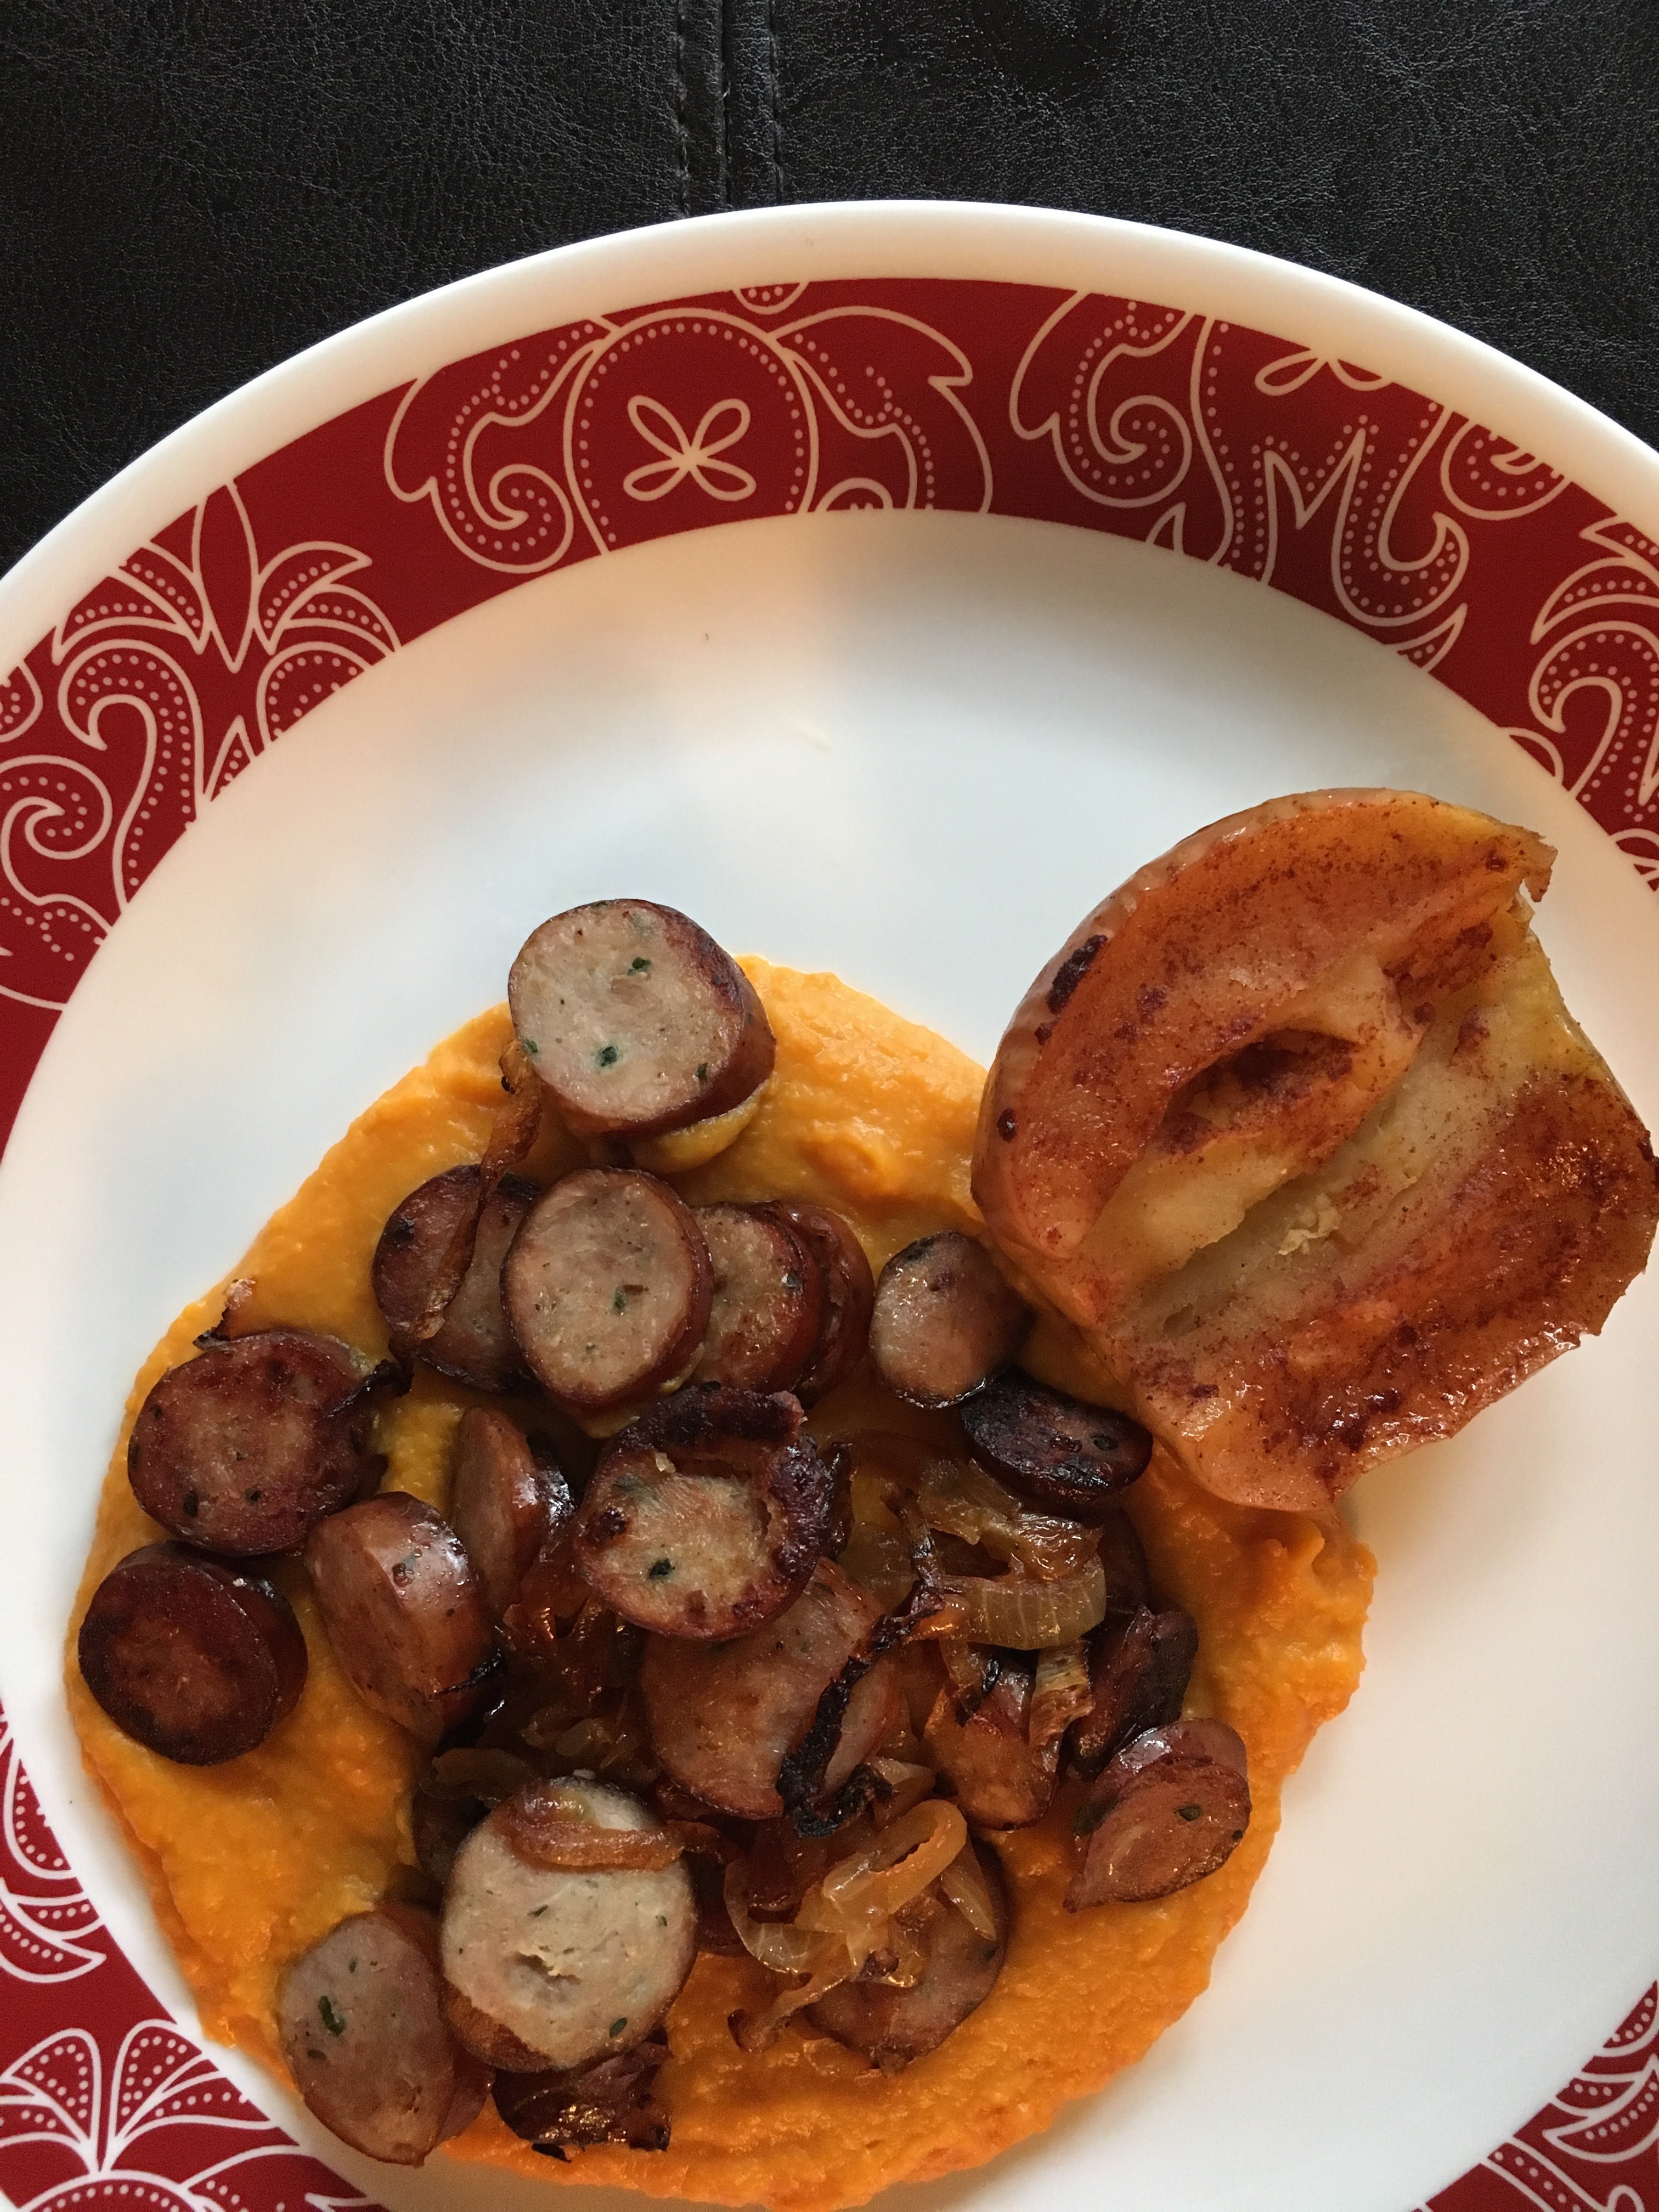 Whole 30 Approved Aidelle's Chicken Apple Sausage (Meal originally called for Banger Sausage recipe in Whole 30 Book) with Sweet Potato Mash and Caramelized Onions